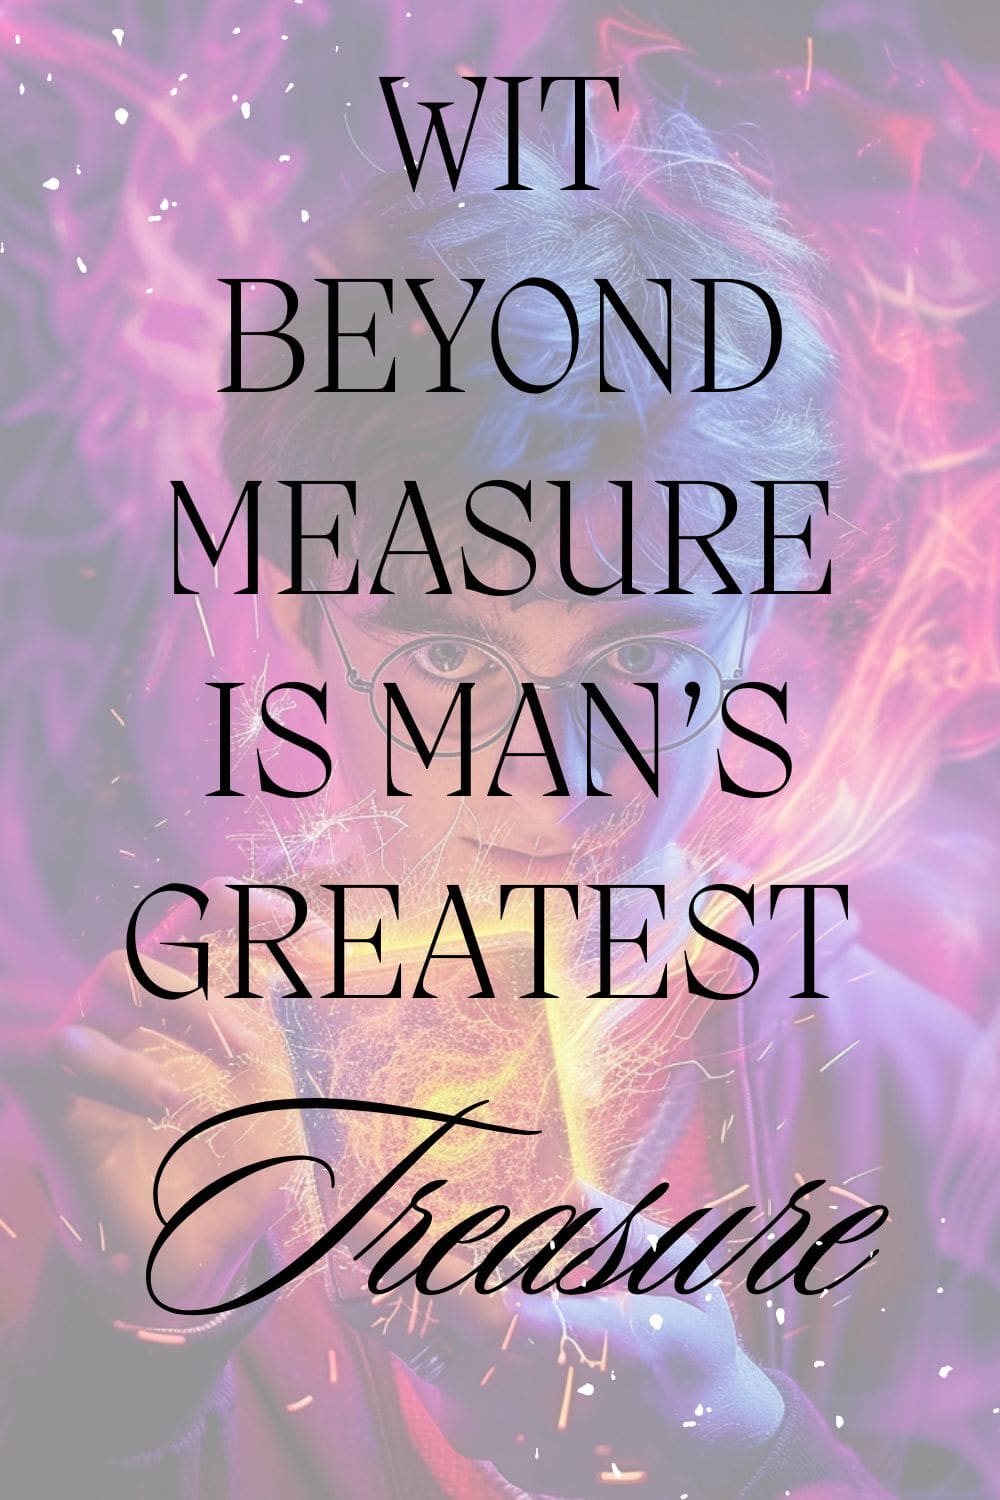 wit beyond measure is man's greatest treasure Harry Potter quote